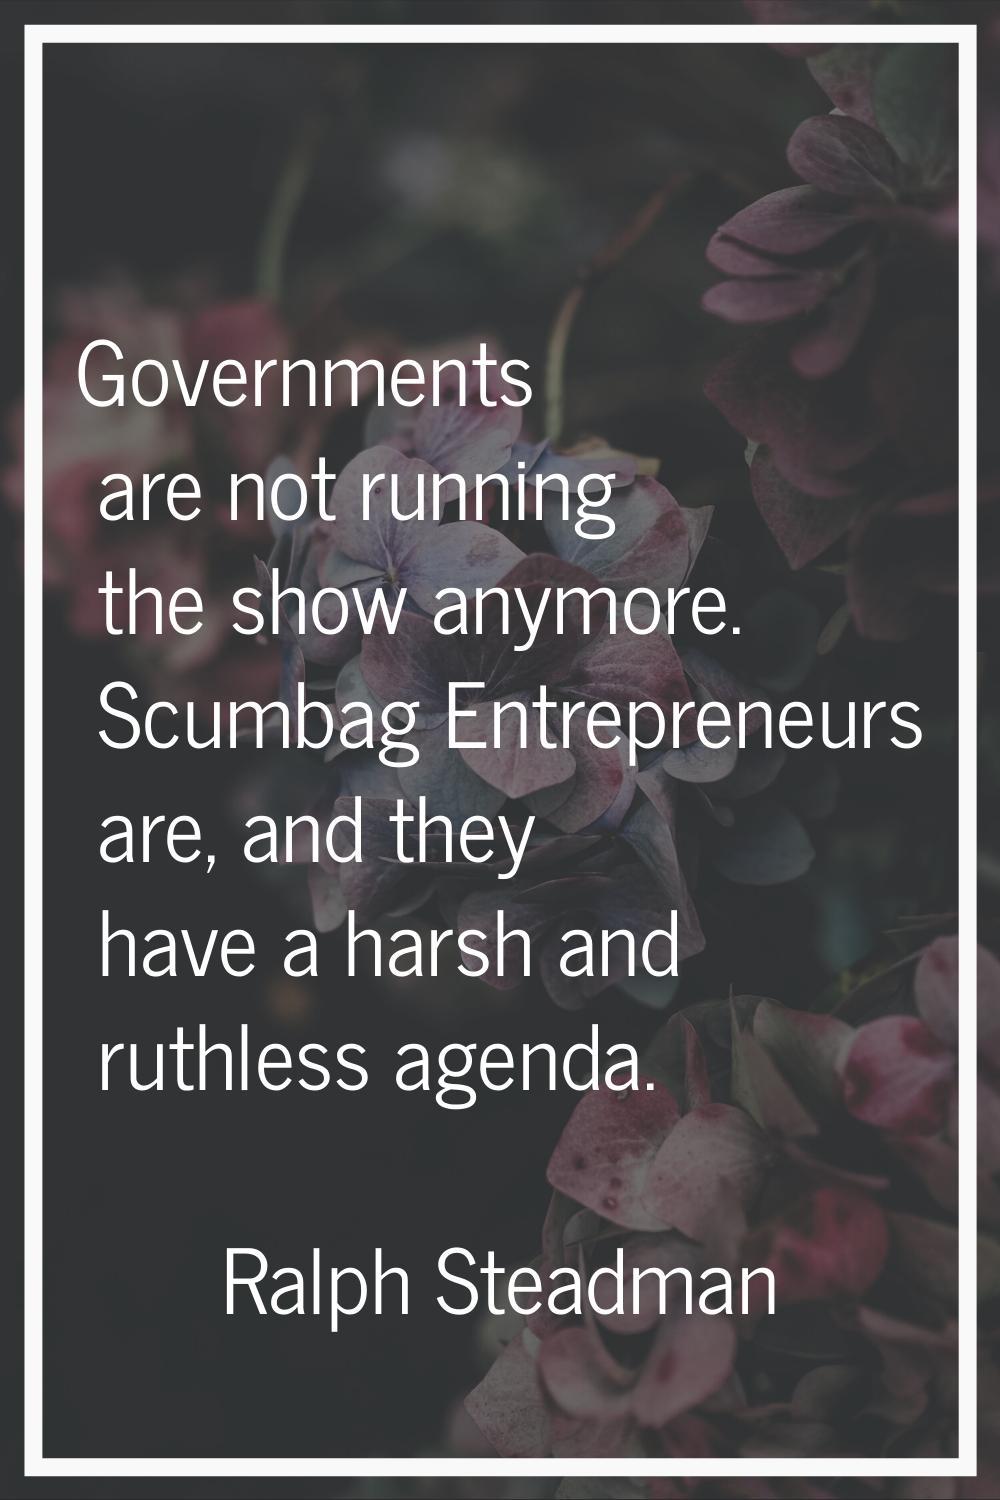 Governments are not running the show anymore. Scumbag Entrepreneurs are, and they have a harsh and 